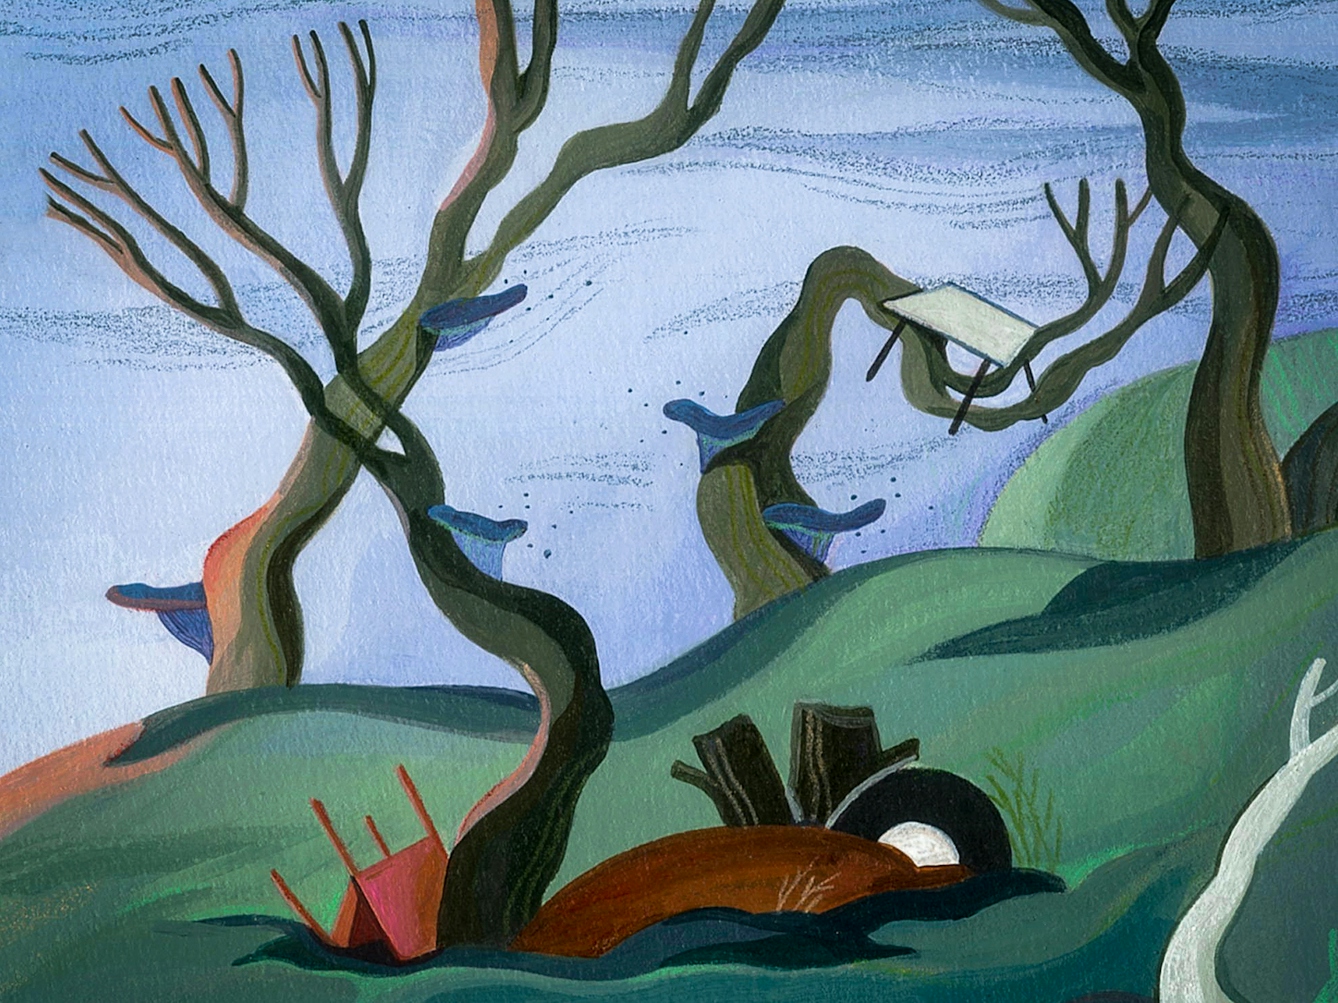 Detail from a larger painted artwork with vivid saturated colours. The scene shows landscape where the trees are leafless and have twisted trunks and branches. The land is littered with rubbish, mainly abandoned furniture, some of which is lodged in the tree branches.